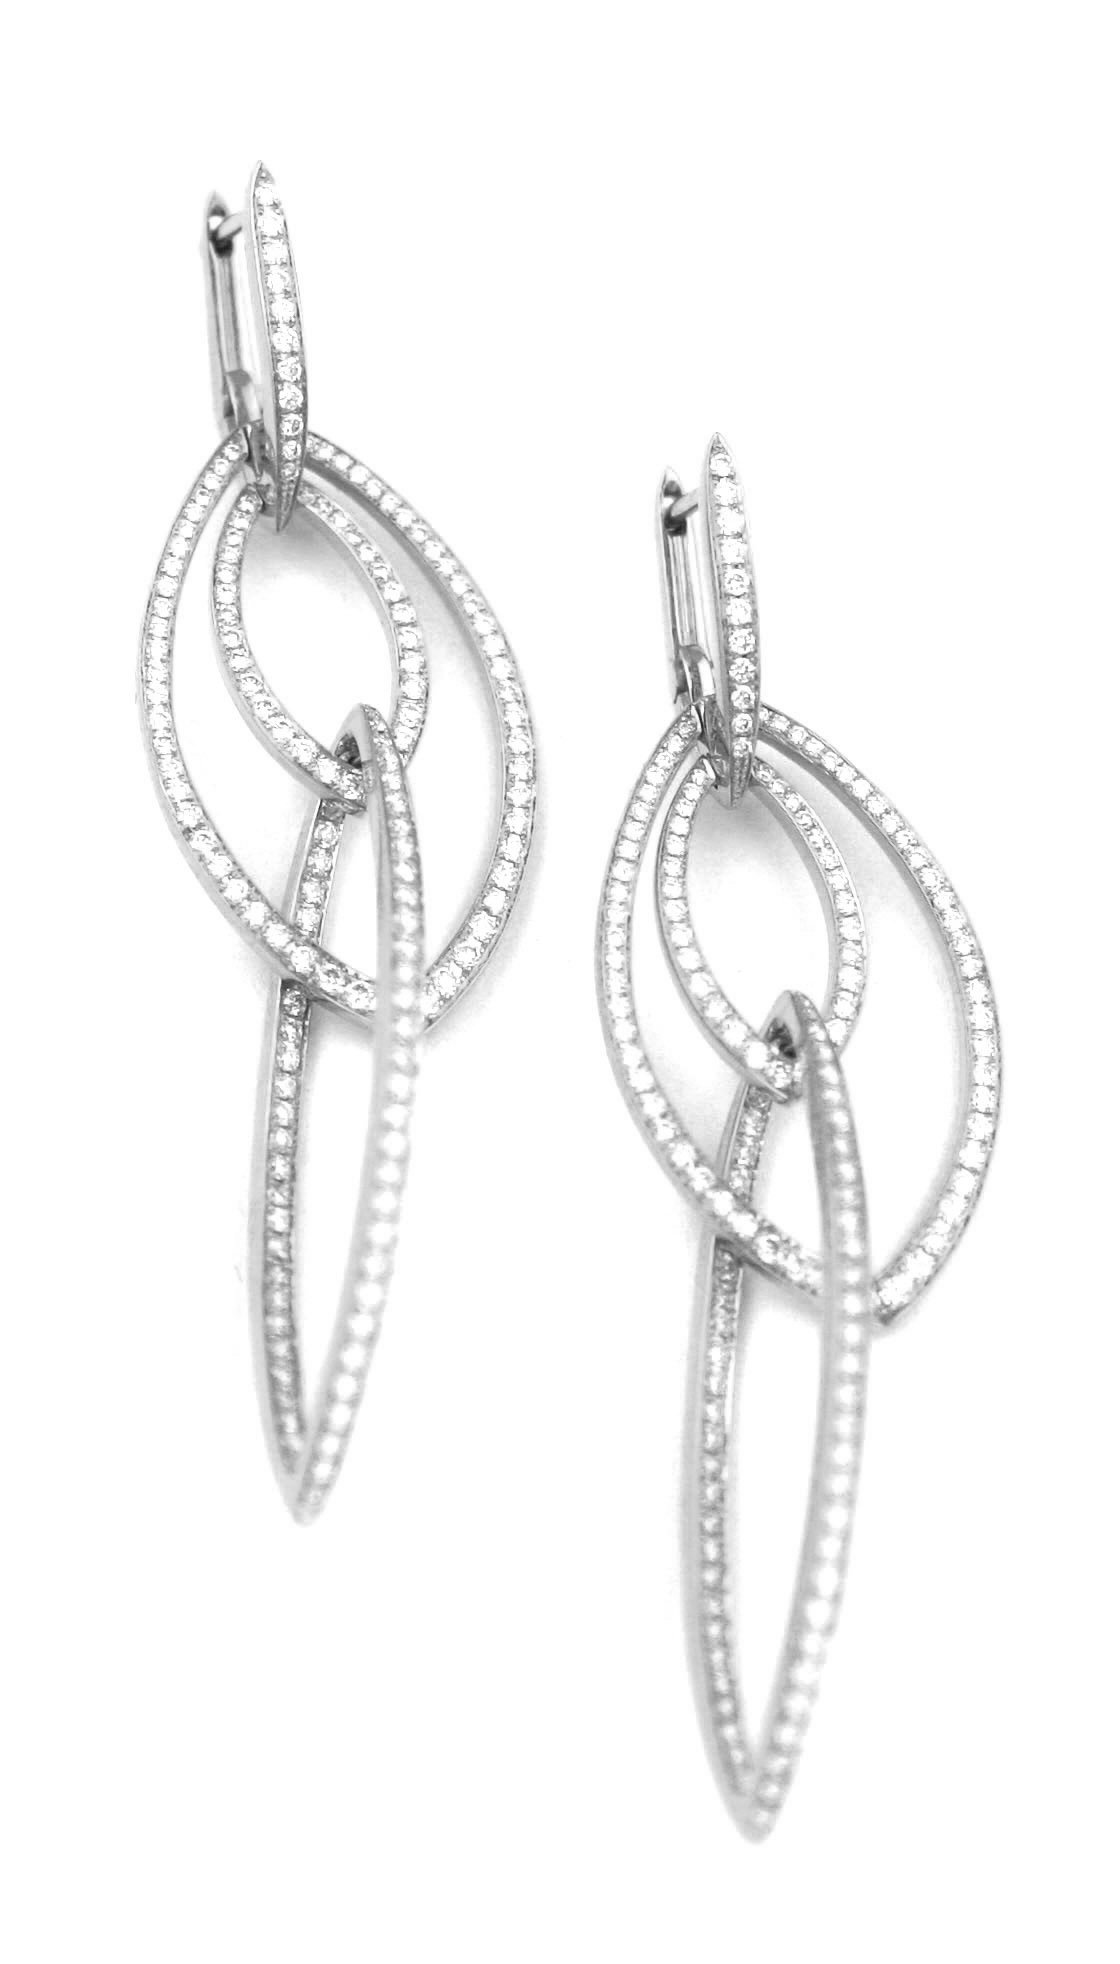 Thorn 3D Interlaced Hoop Earrings with White Diamonds in 18kt White Gold